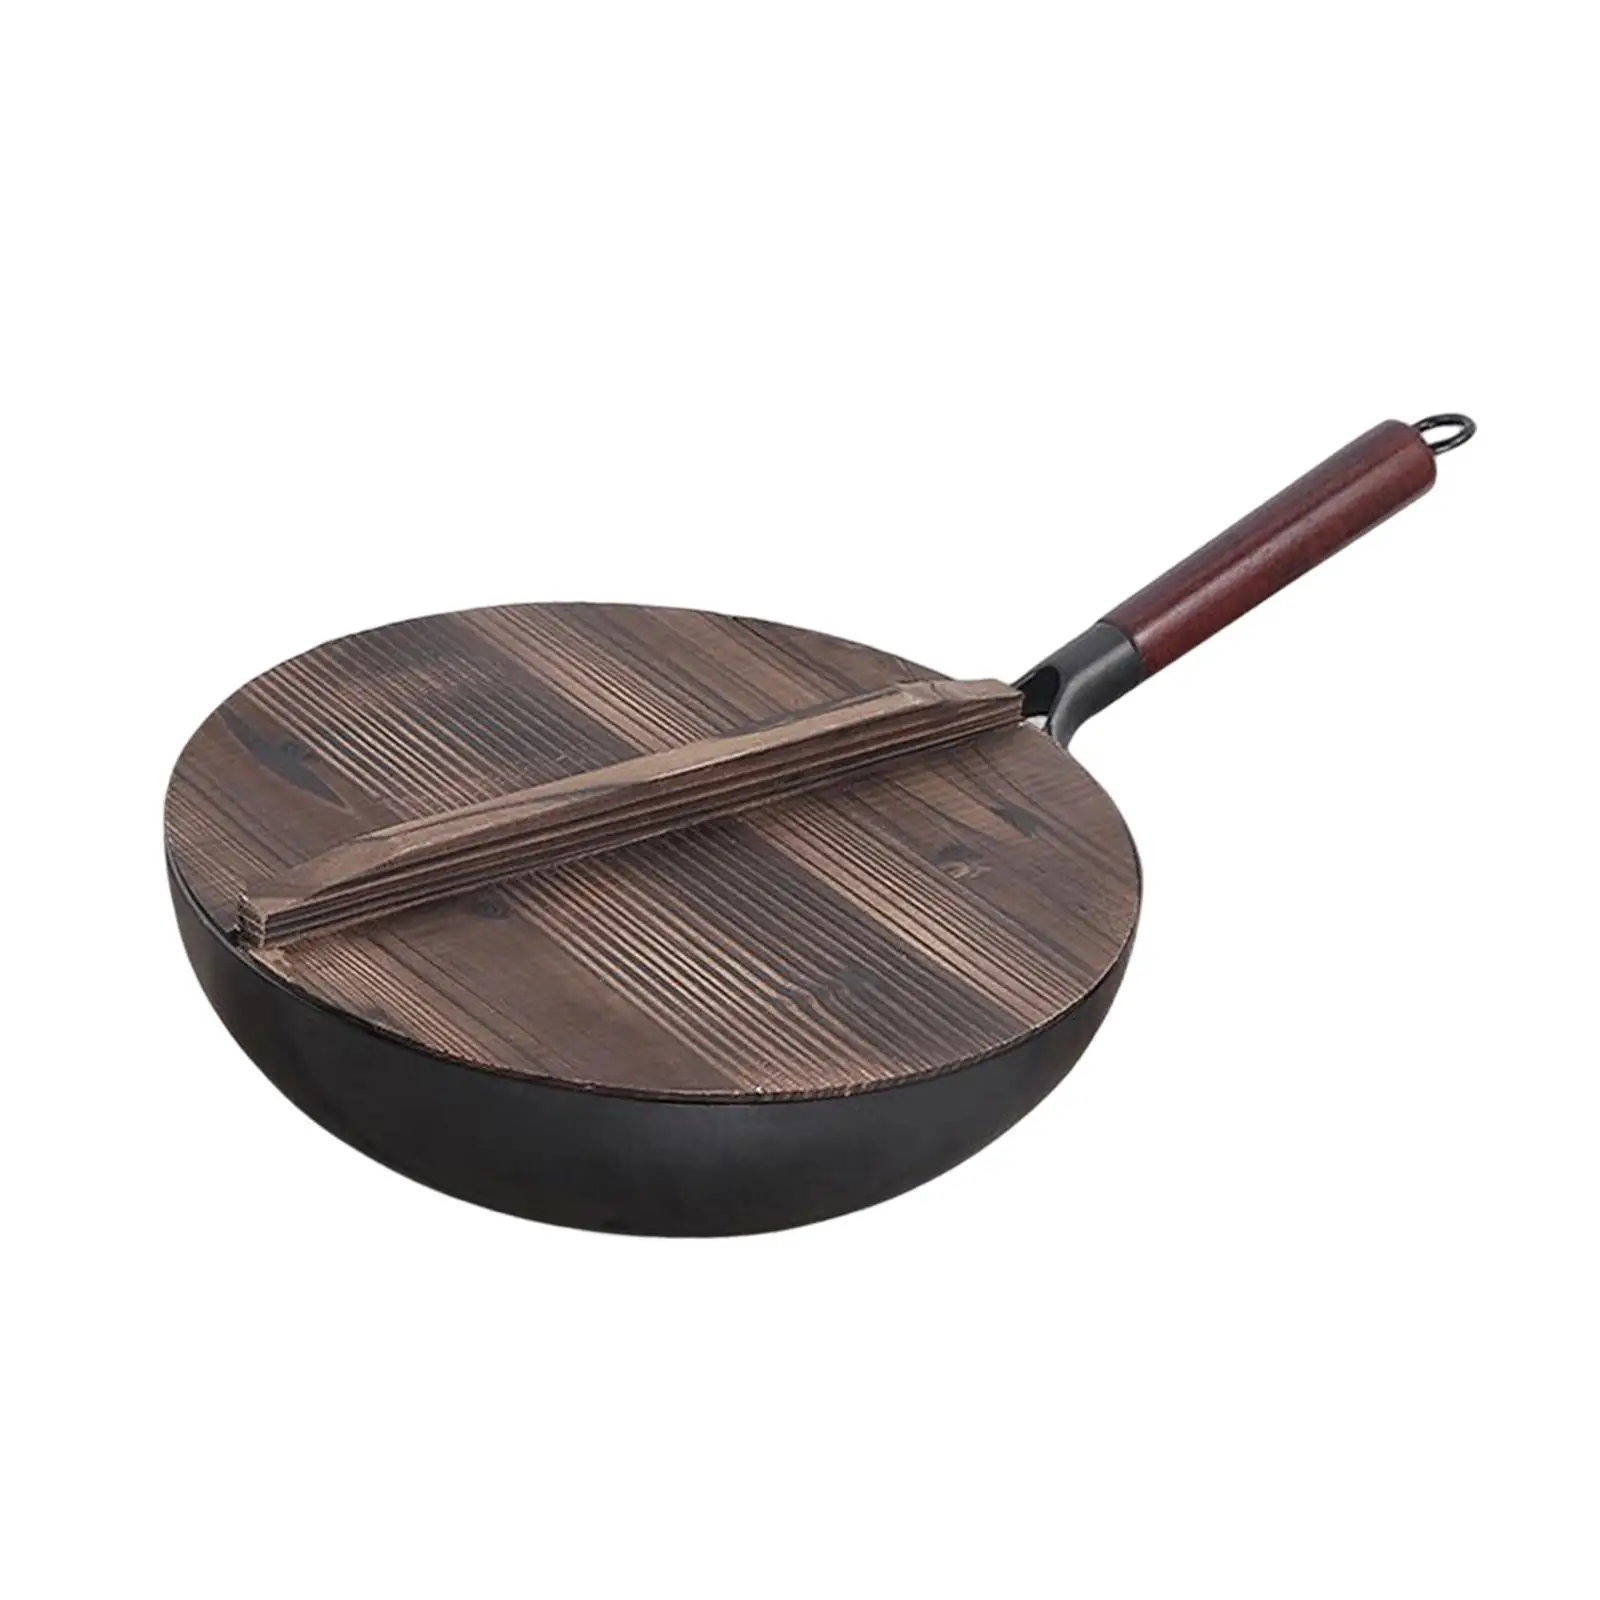 Wok Pan Long Handle Cooking Wok Nonstick Cast Iron Grilling wok Pan with Lid Stir-Fry Pan for Kitchen Cooking 32cm Meat Beef